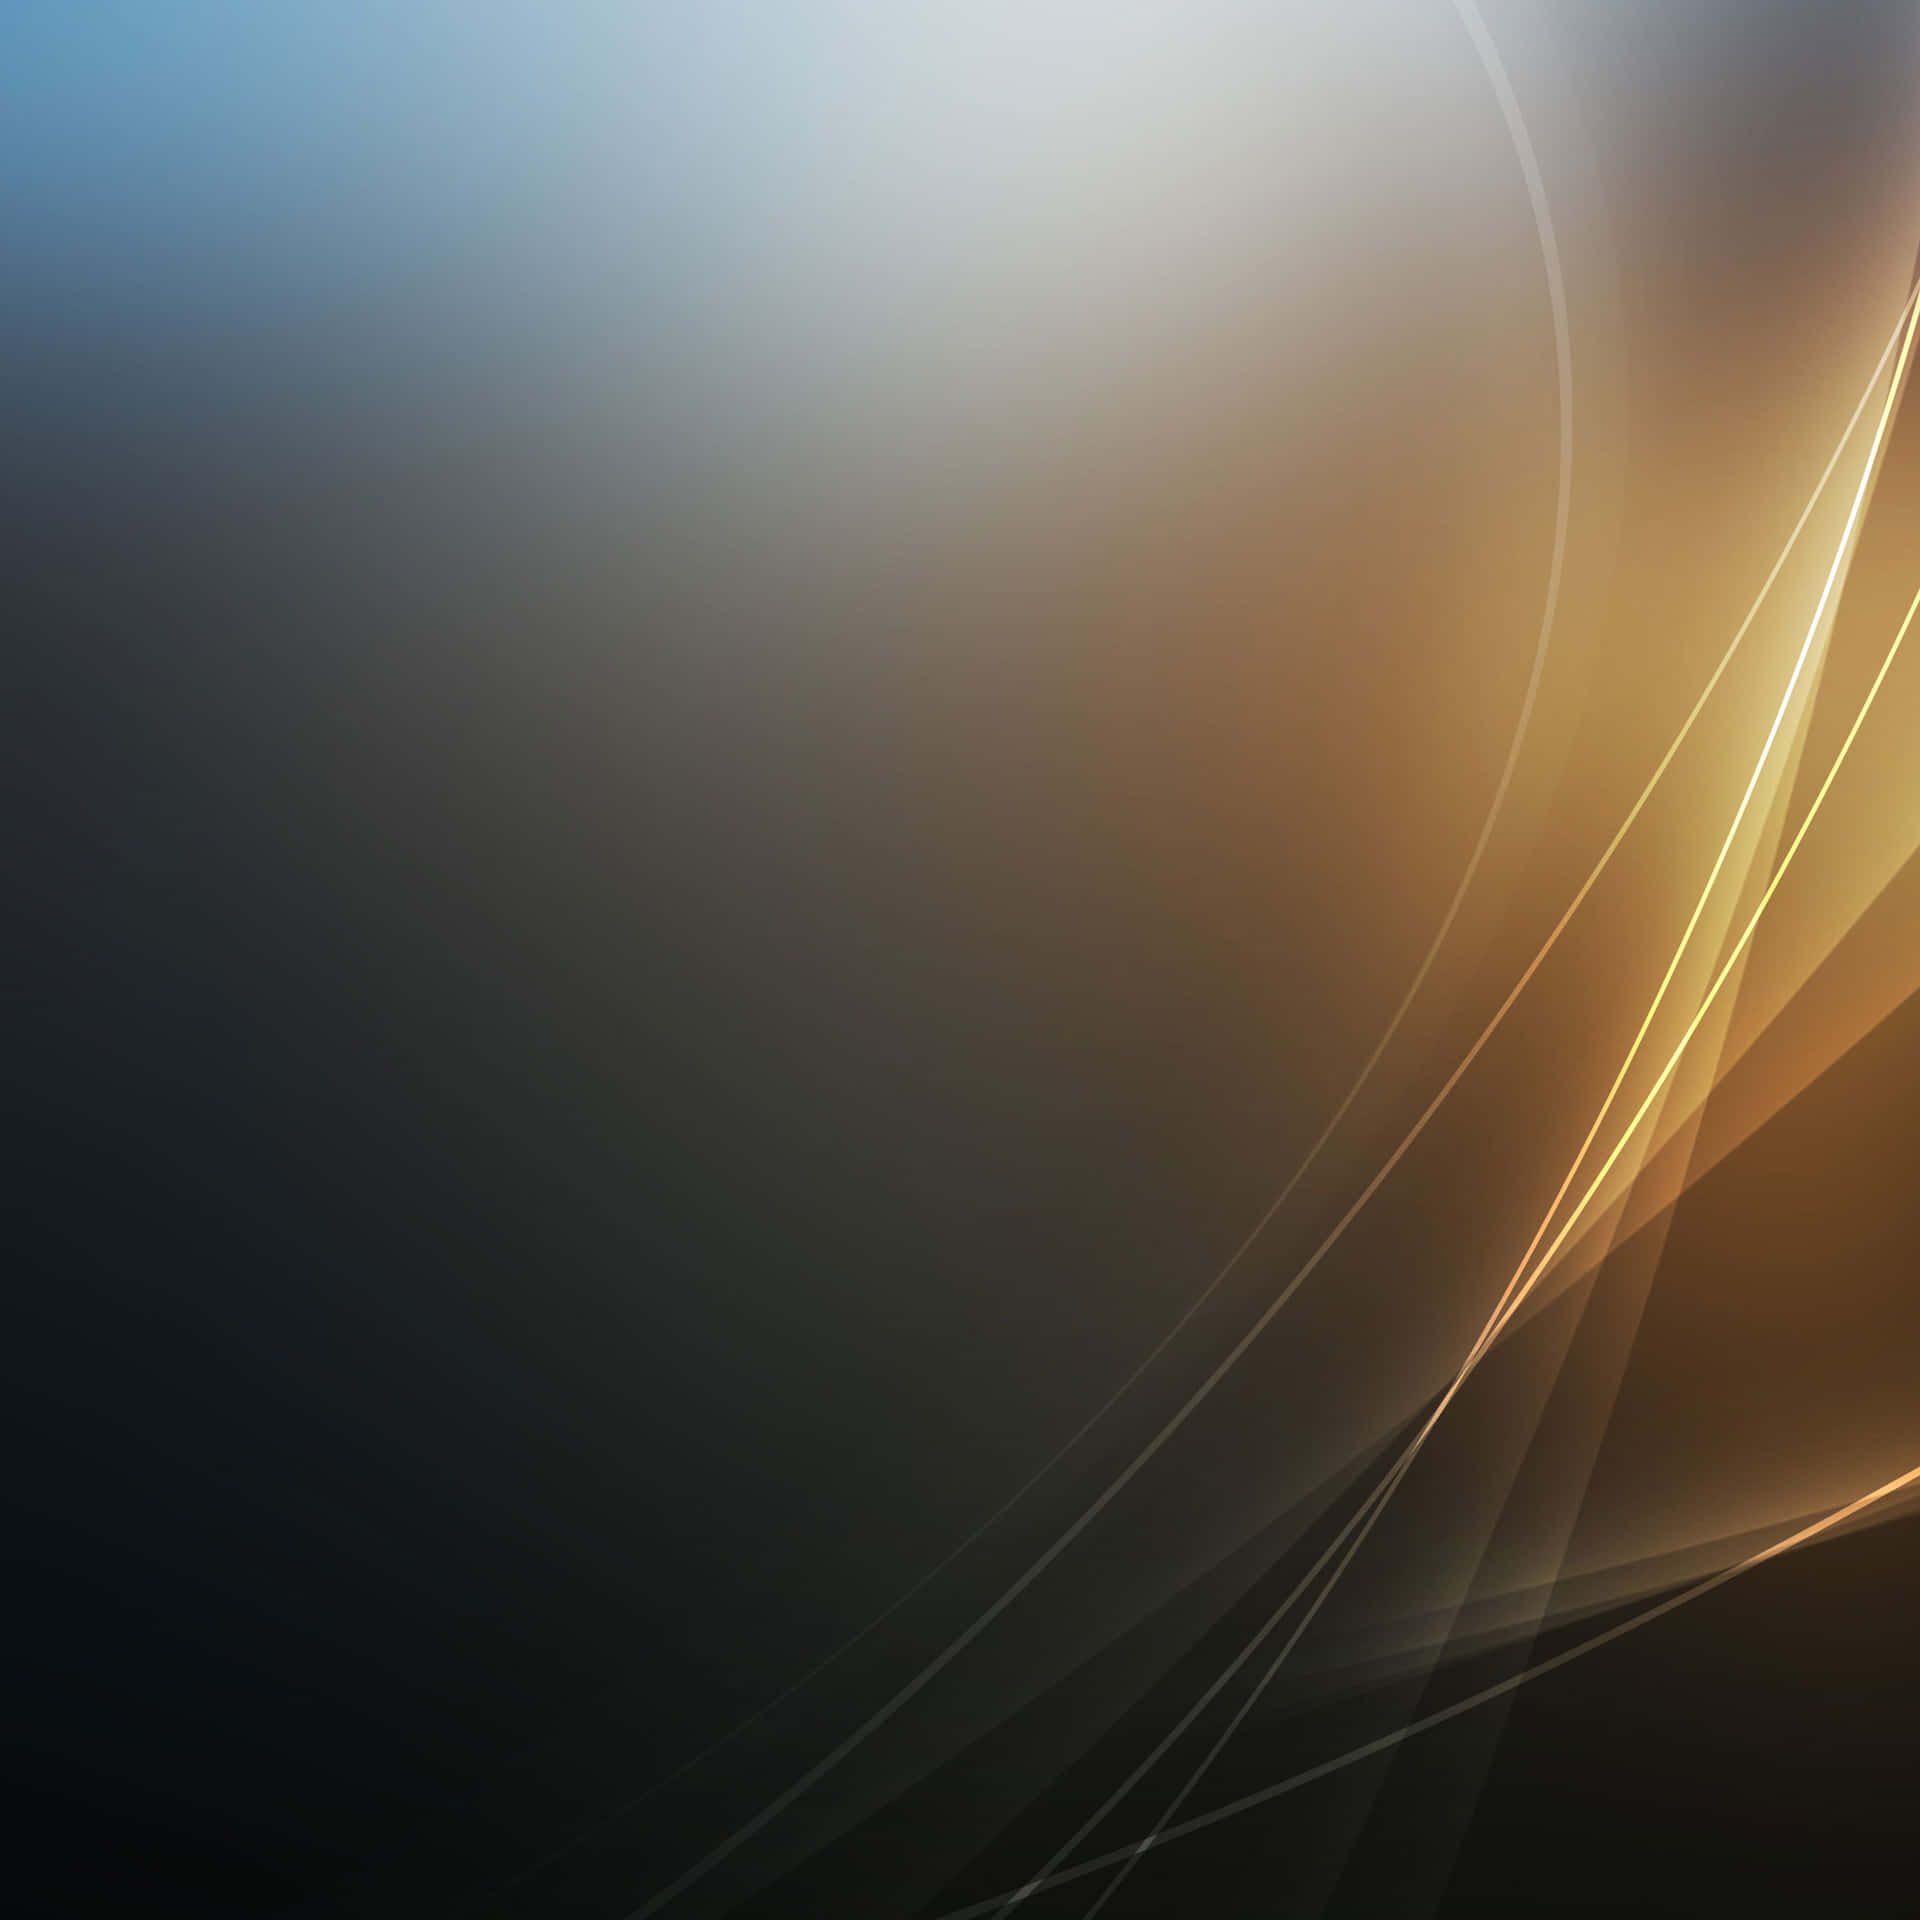 Download A Black And Gold Abstract Background With A Light Shining On It |  